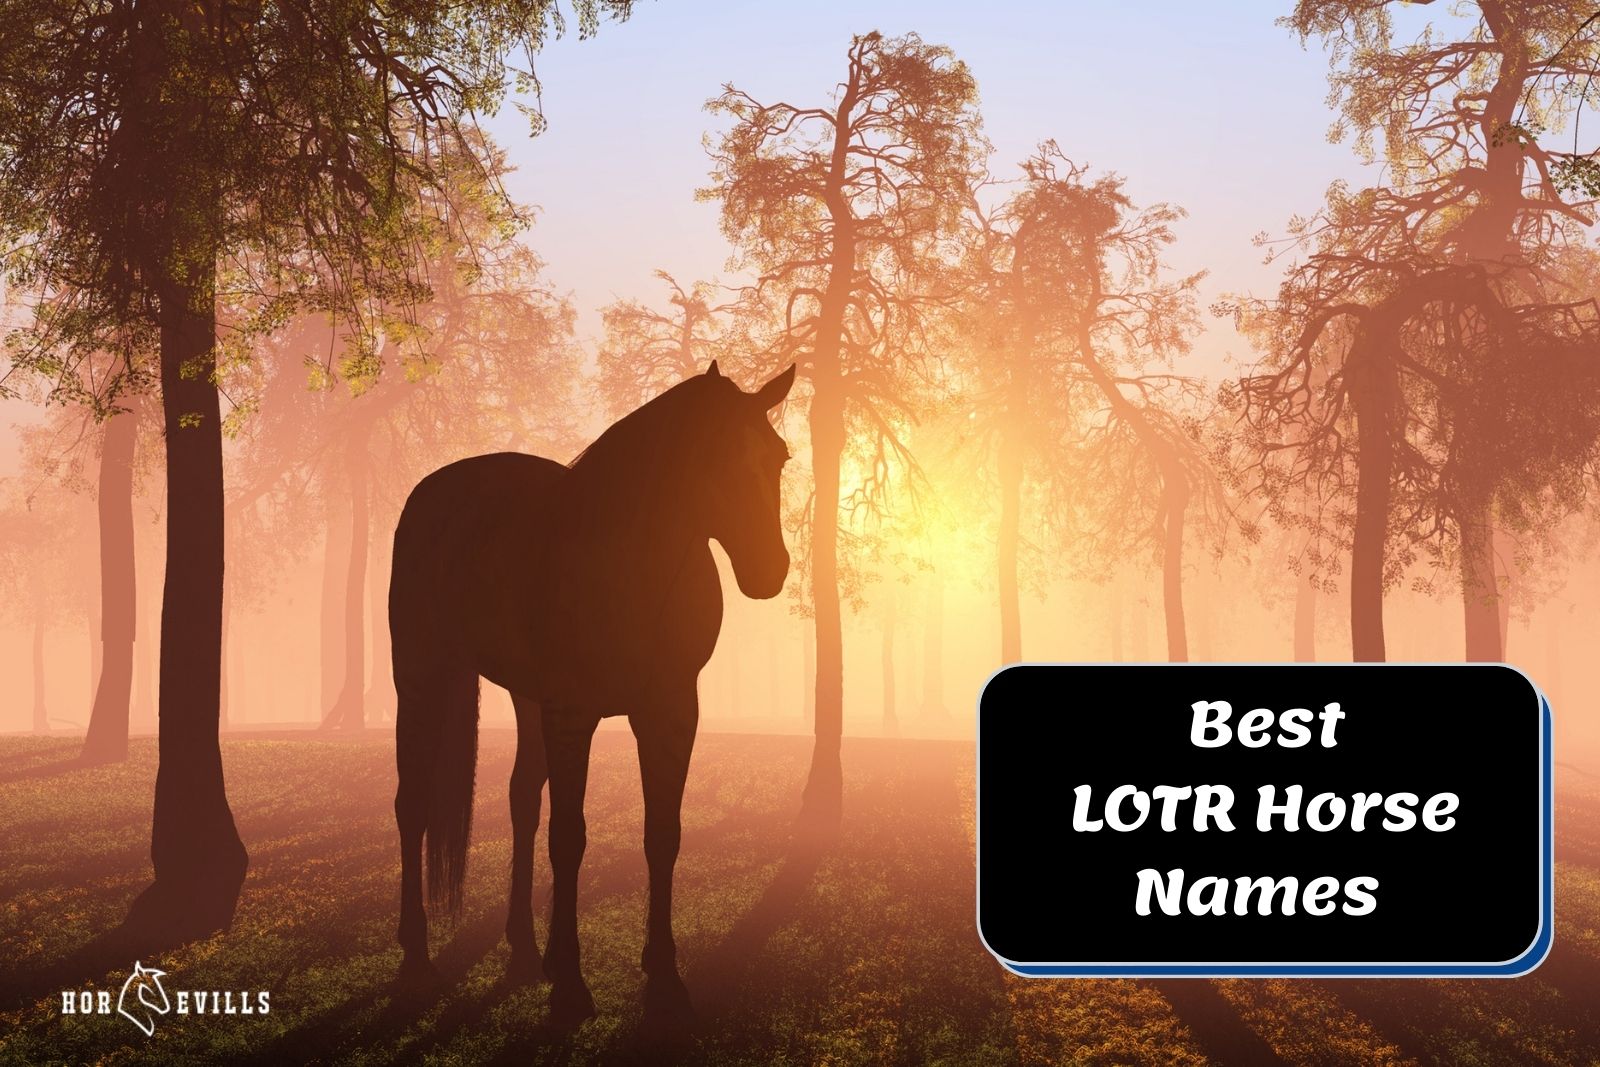 magical horse in the forest beside "best lotr horse names" poster